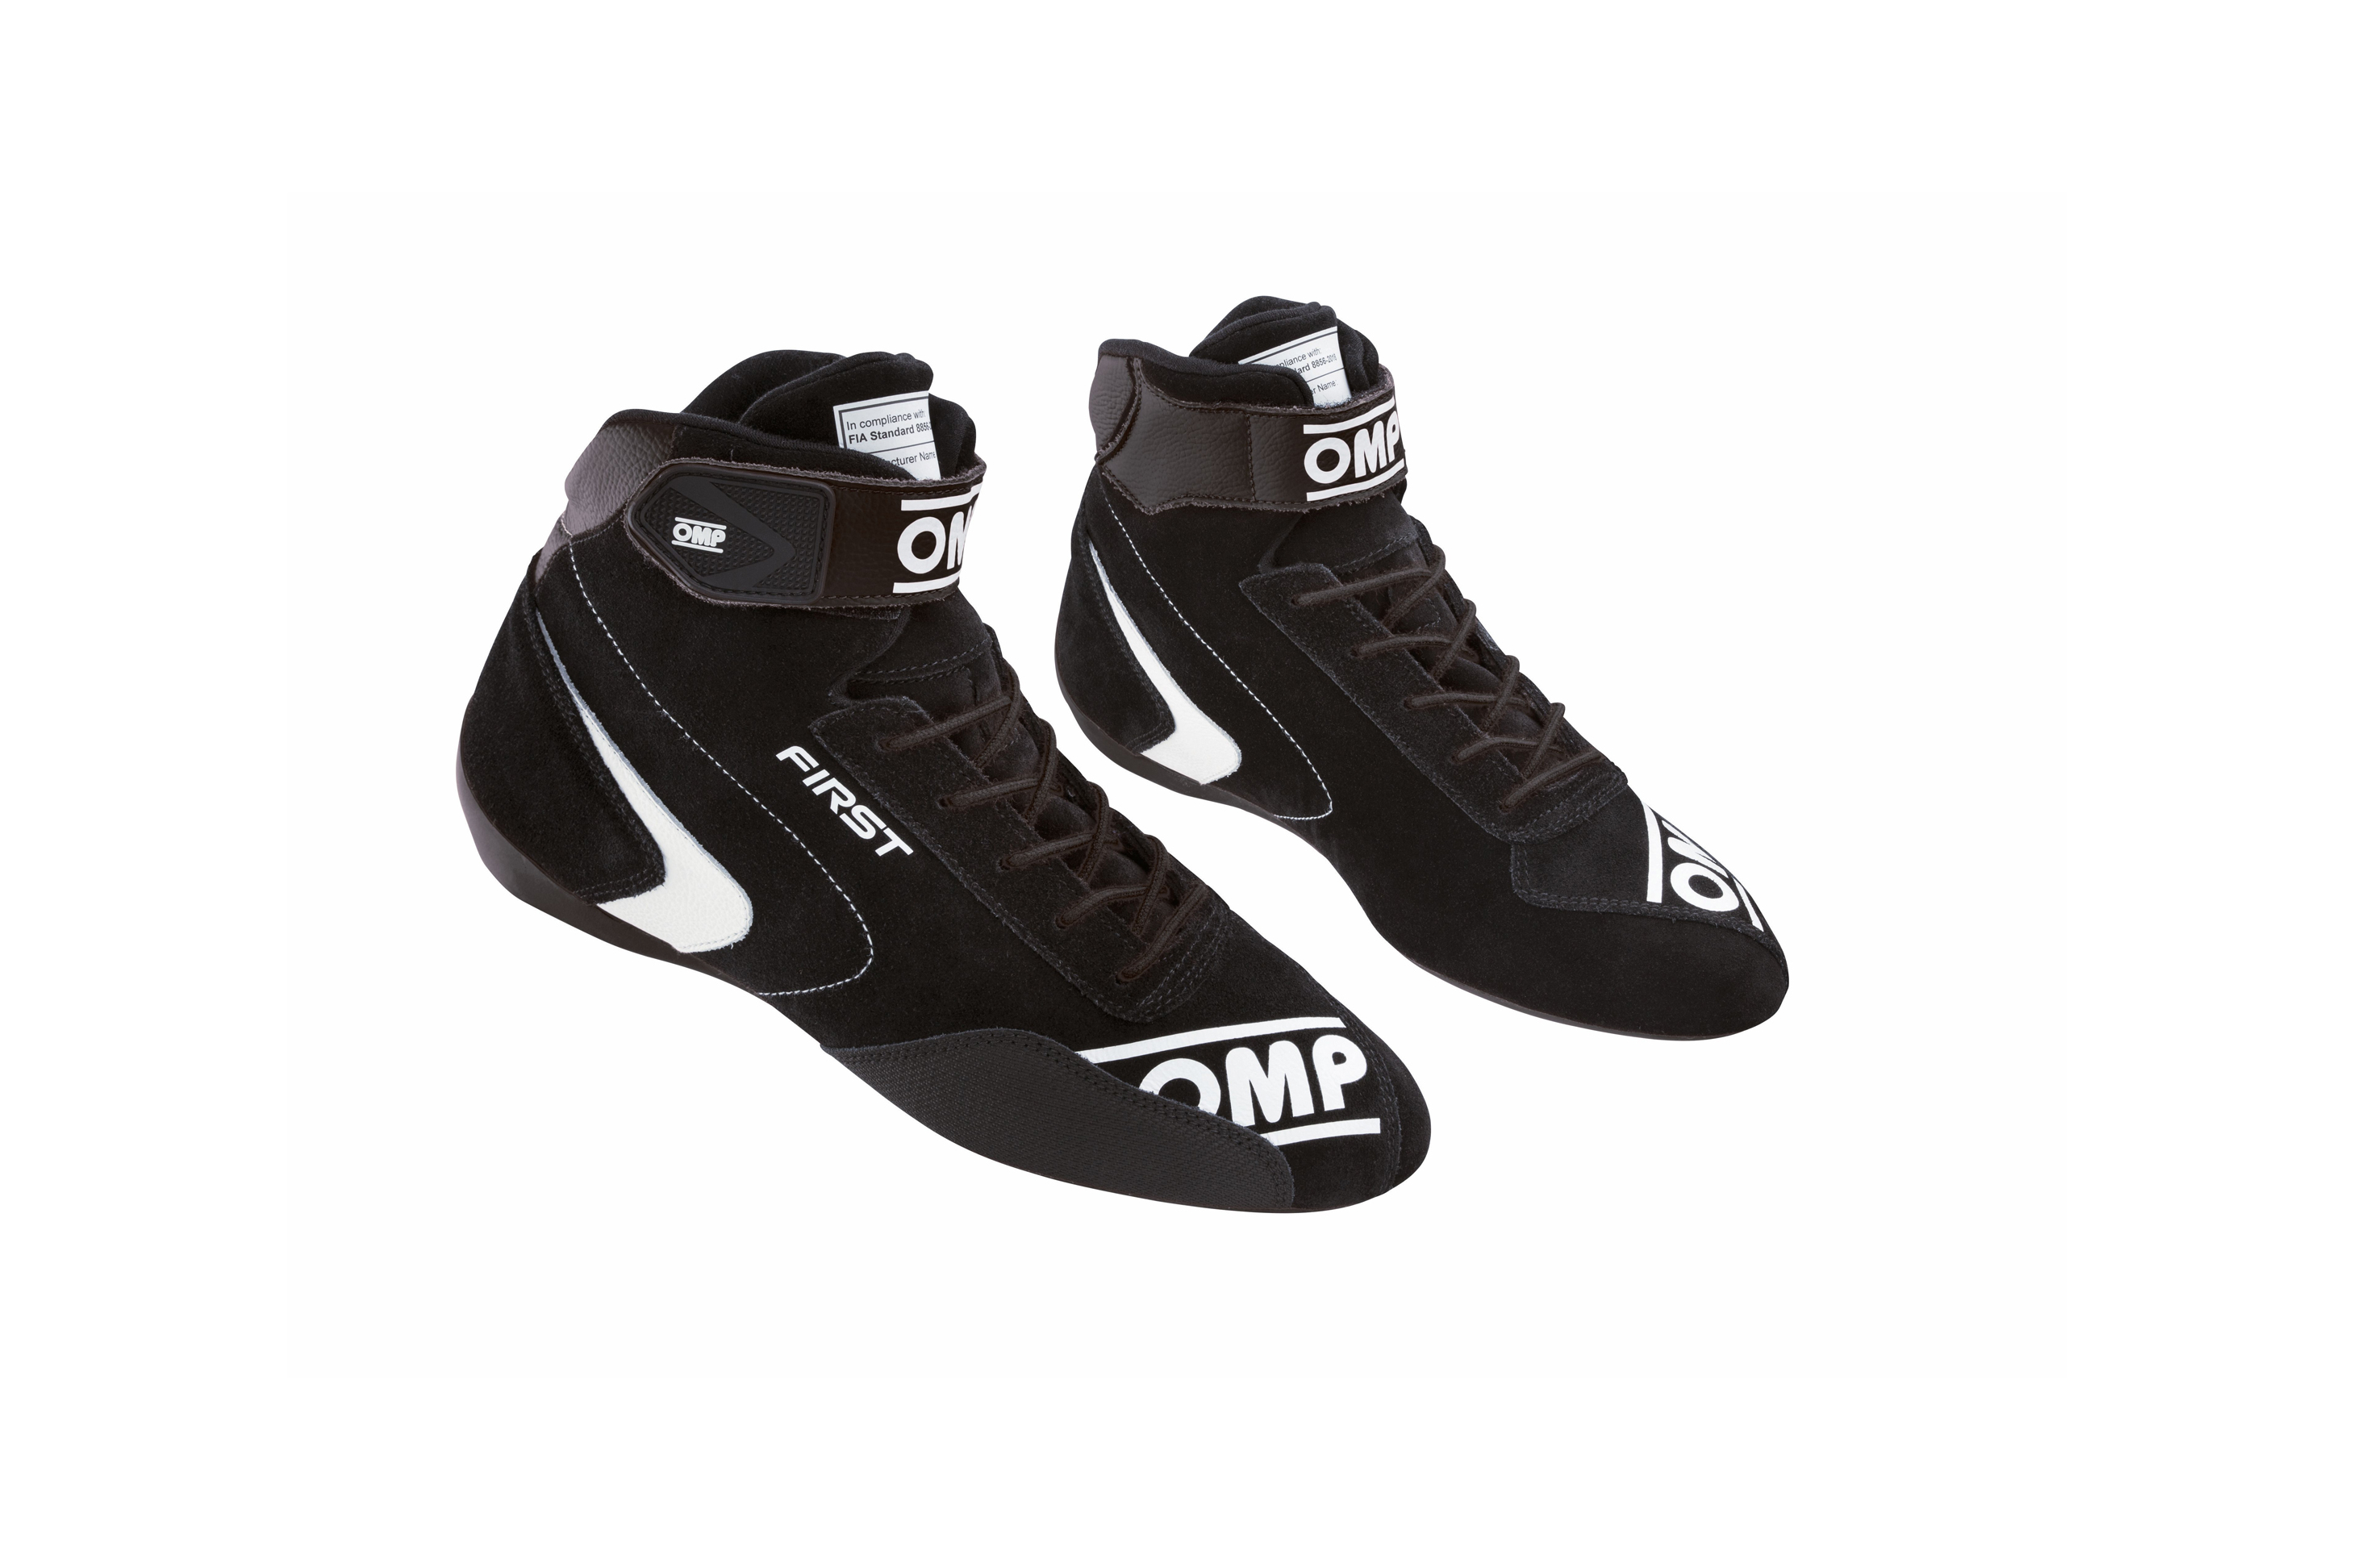 Omp First Shoes Black/White Size 42 Fia 8856-2018 